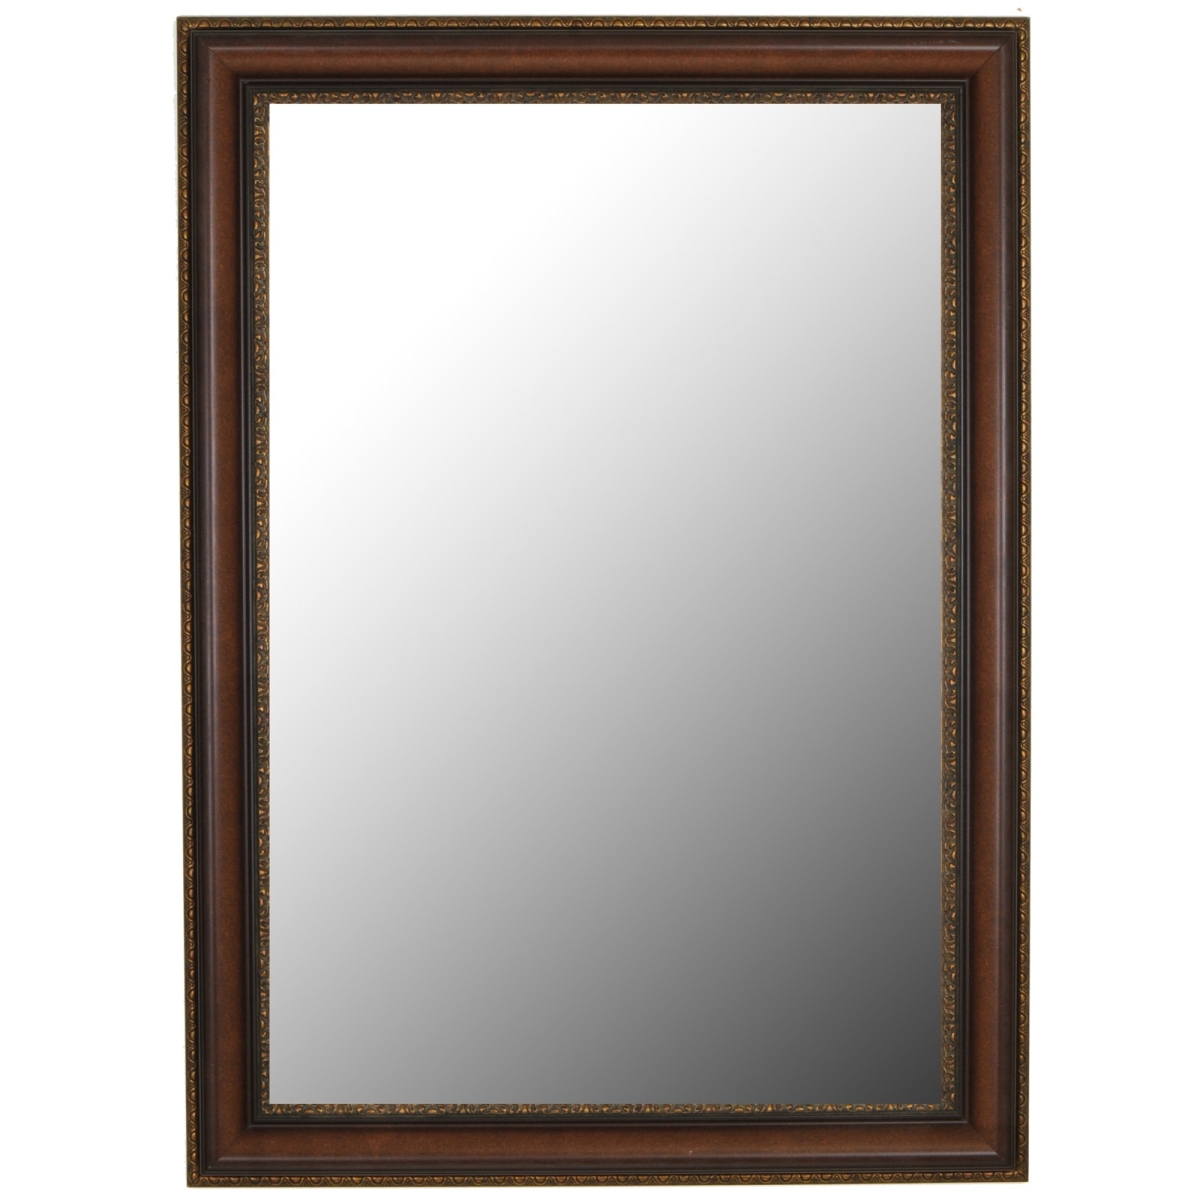 Hitchcock Butterfield 810502 Brown Janette Wall Mirror - 29.5 X 41.5 In.